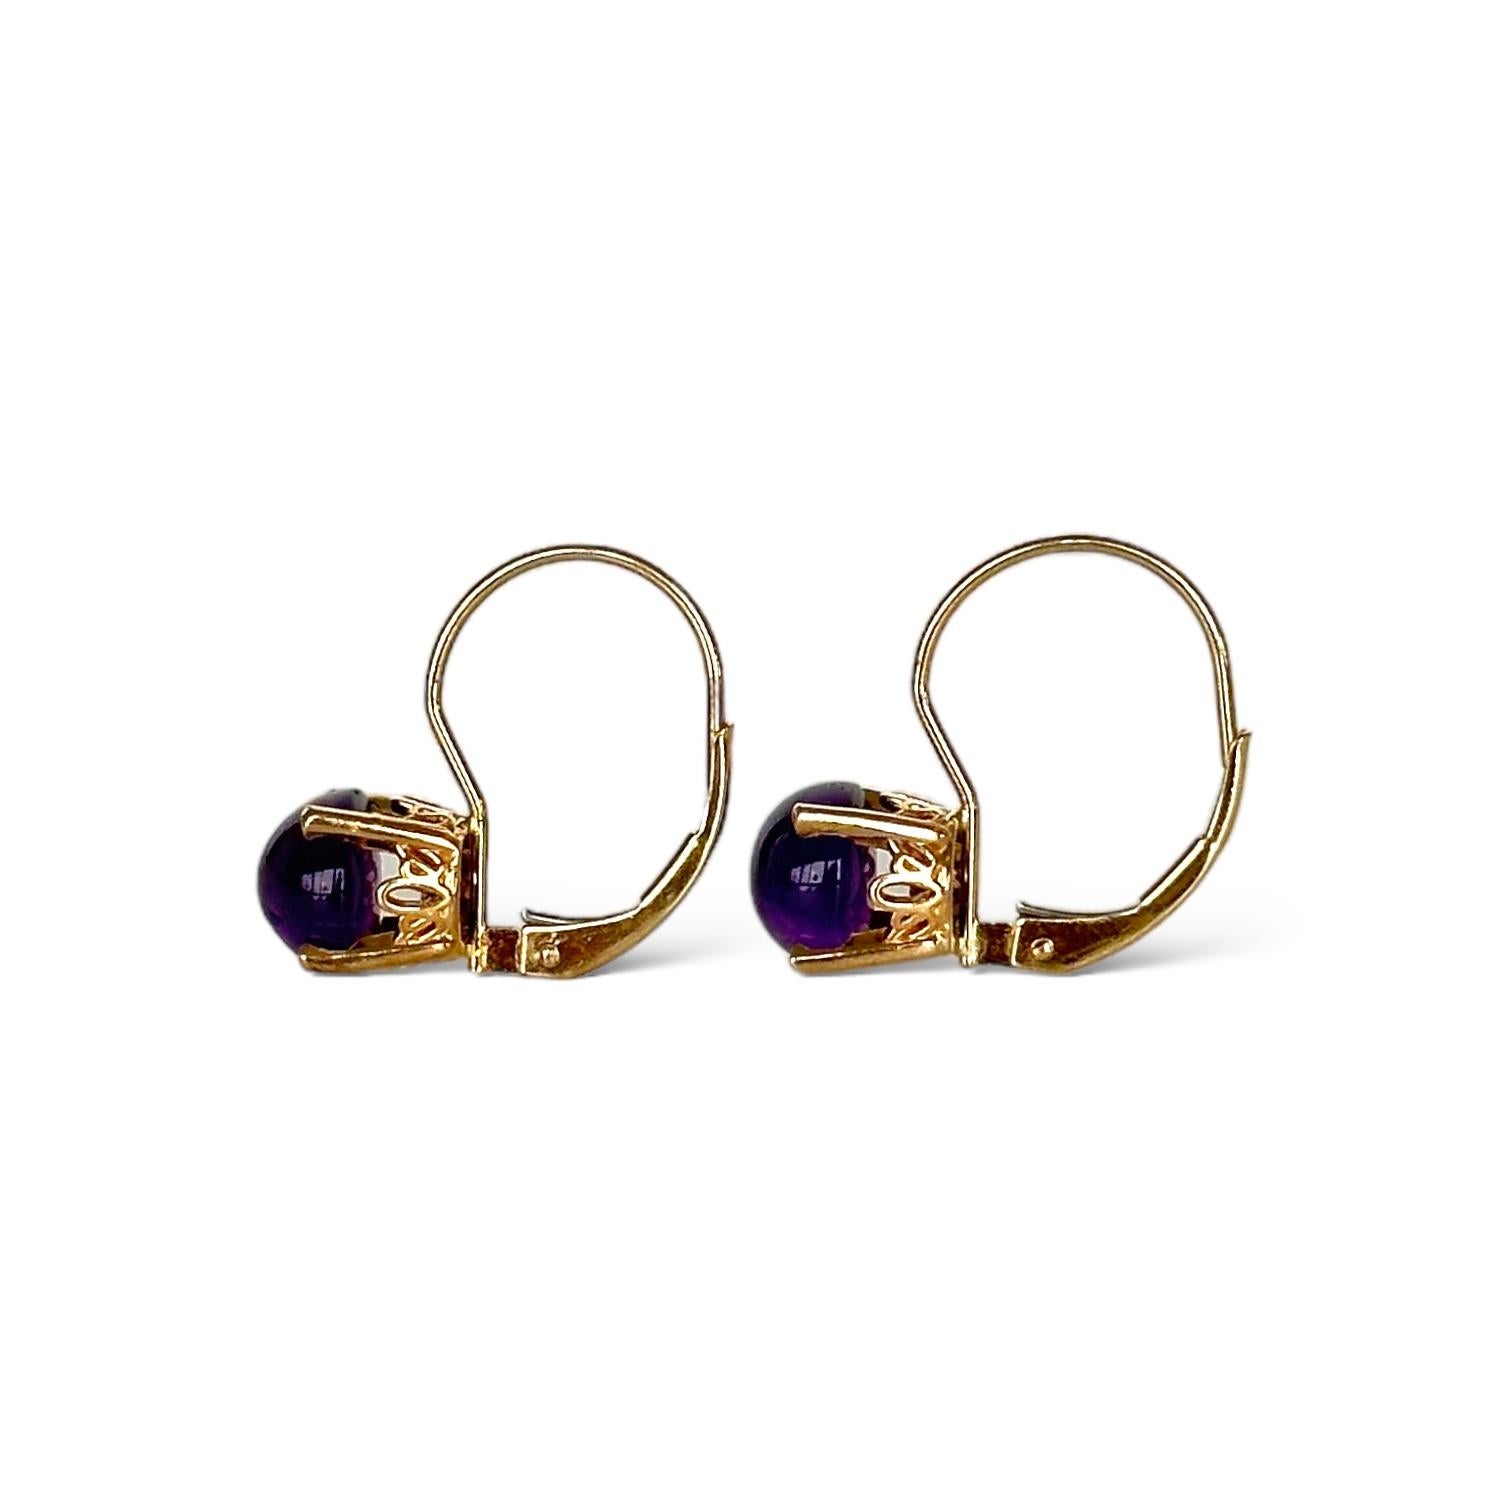 2.00 Carat Amethyst Cabochons 14K Yellow Gold Earrings In Good Condition For Sale In West Palm Beach, FL